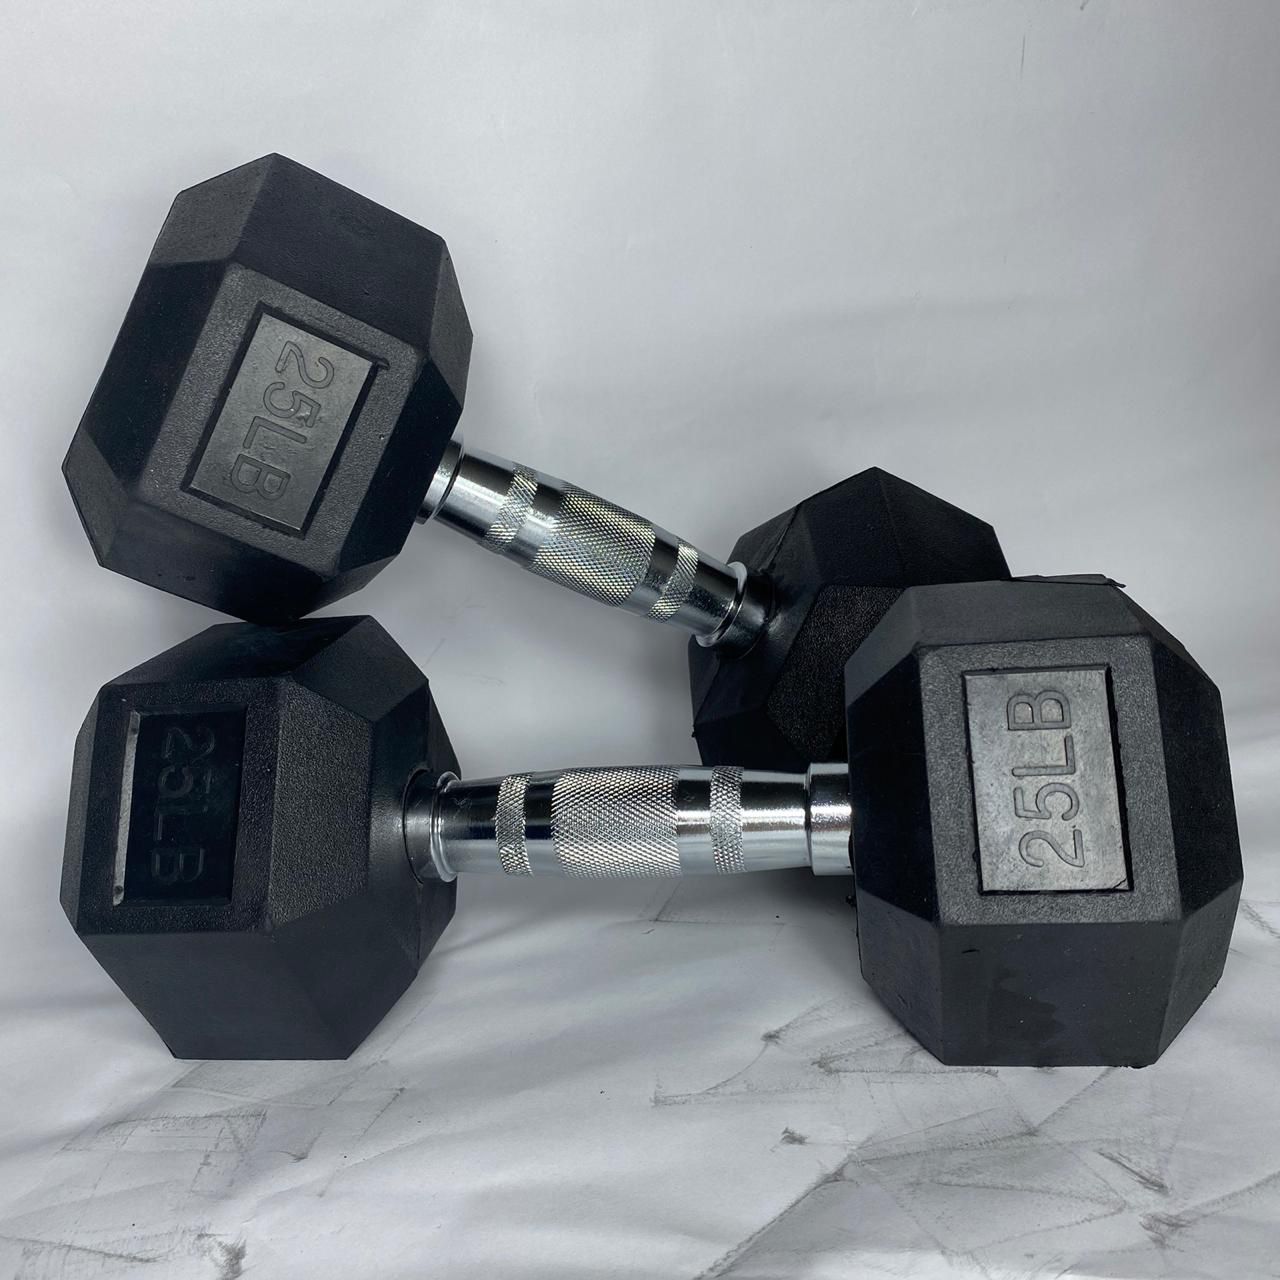 Brand new hex dumbbells rubber 5-50 lbs